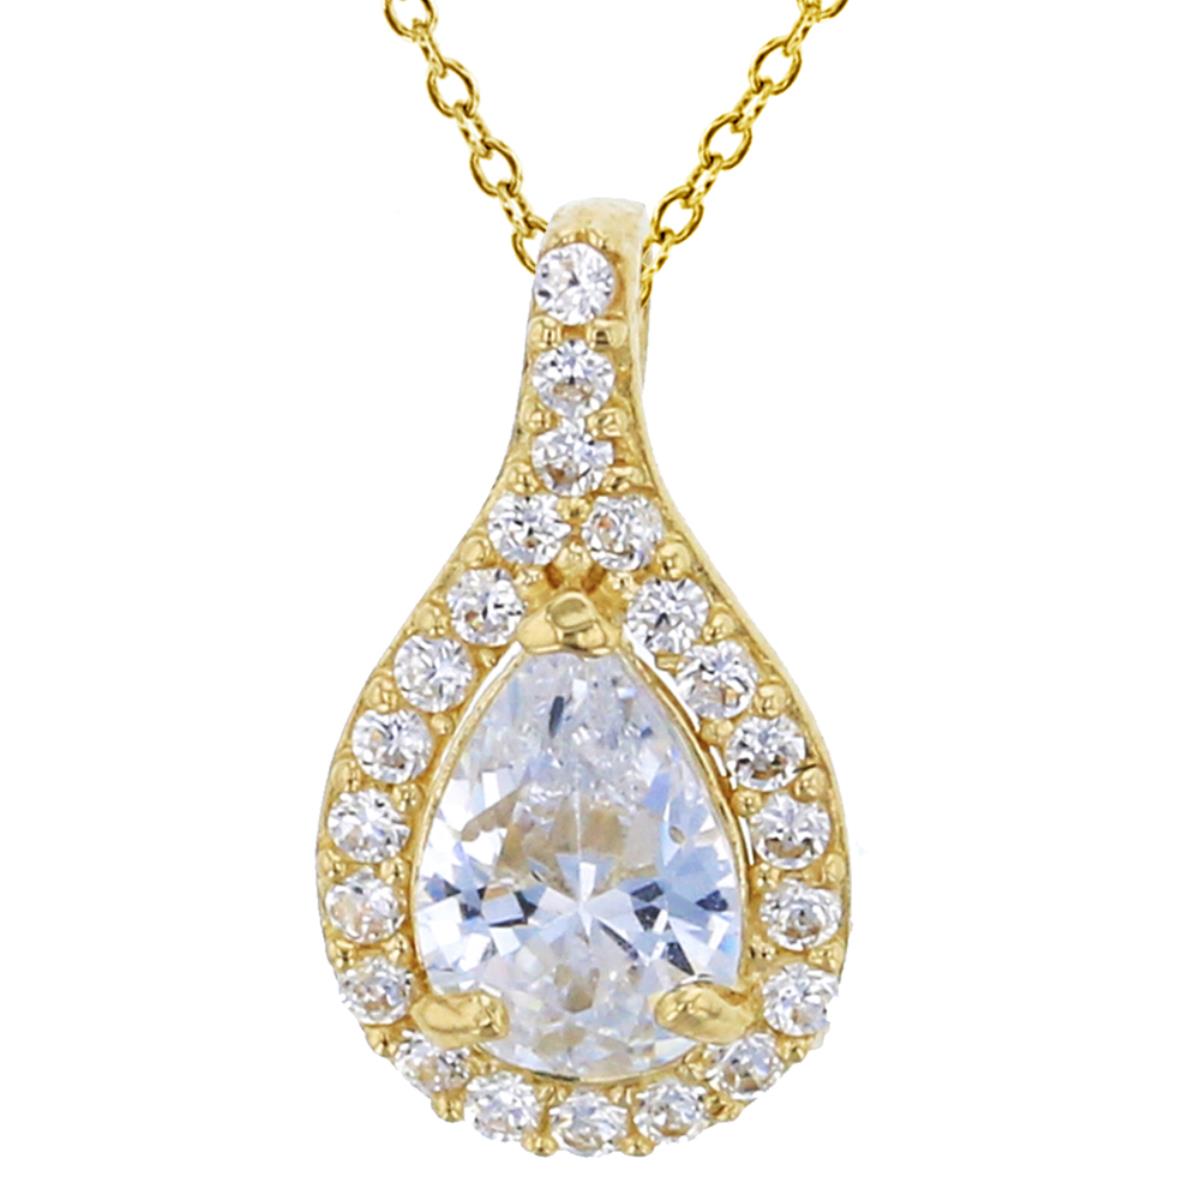 10K Yellow Gold Micropave 6x4mm Pear Cut CZ Halo 18" Necklace